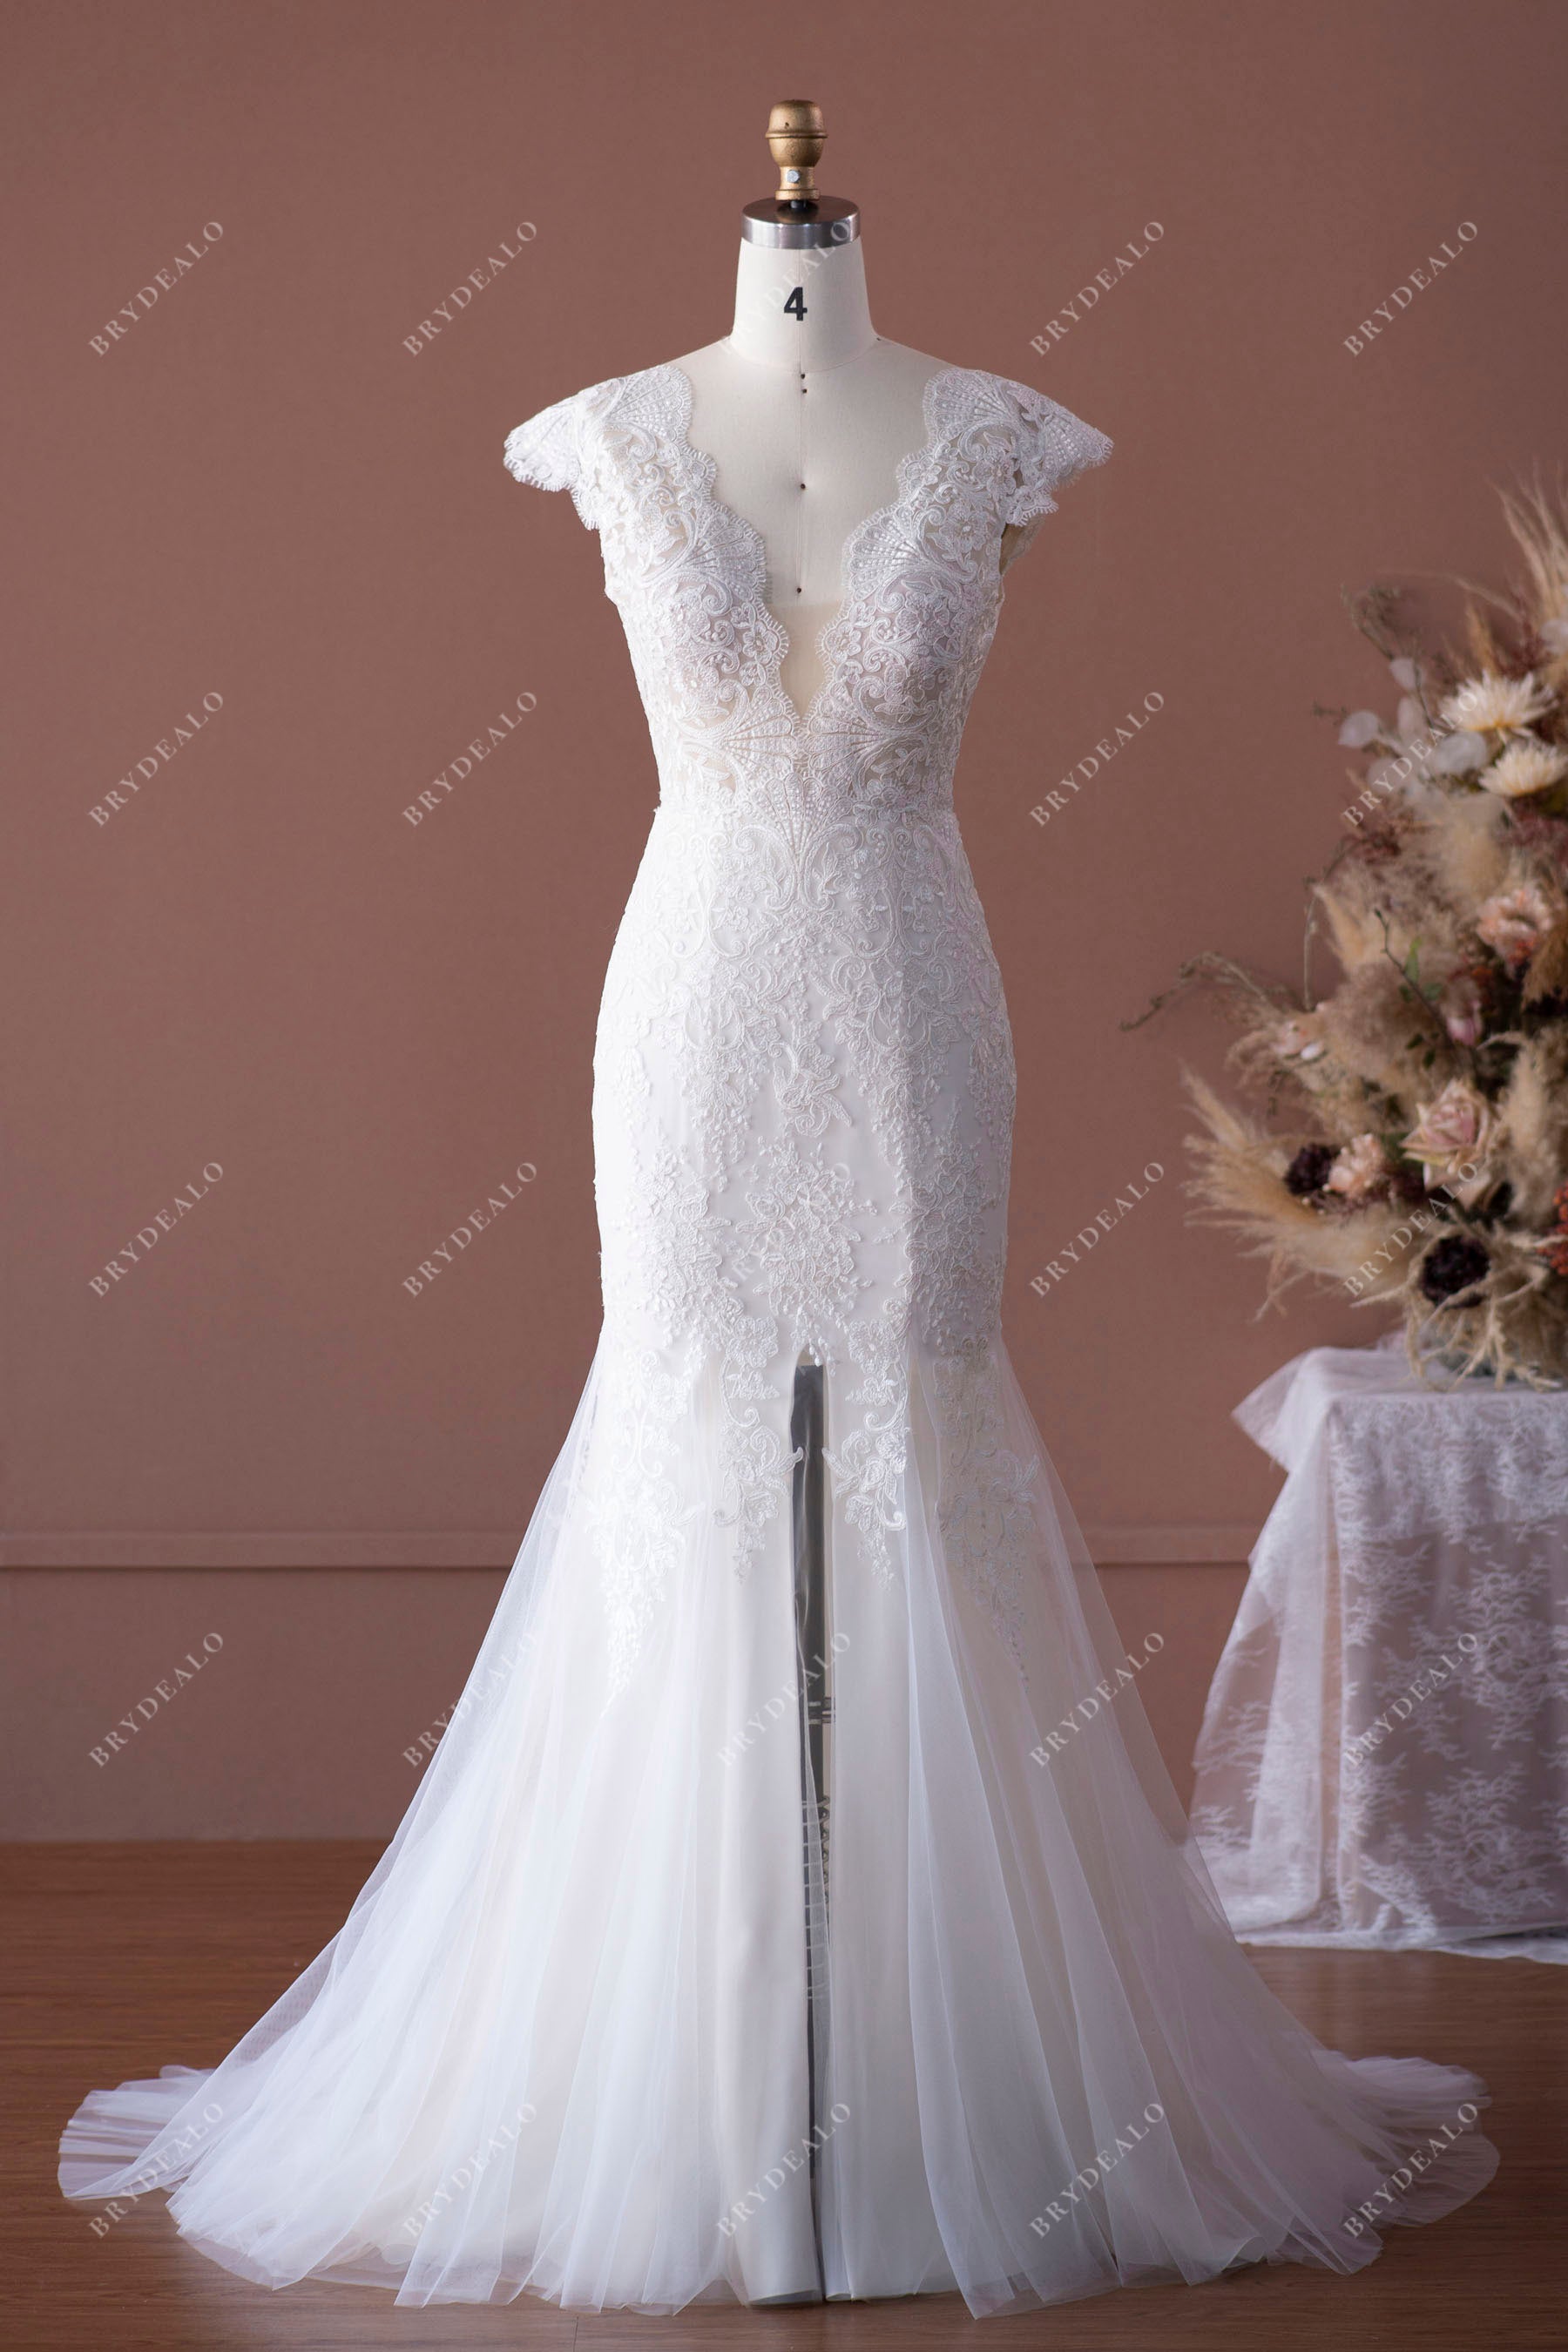 Cap Sleeve Scallop Lace Neck Fit Flare Wedding Dress with High Slit